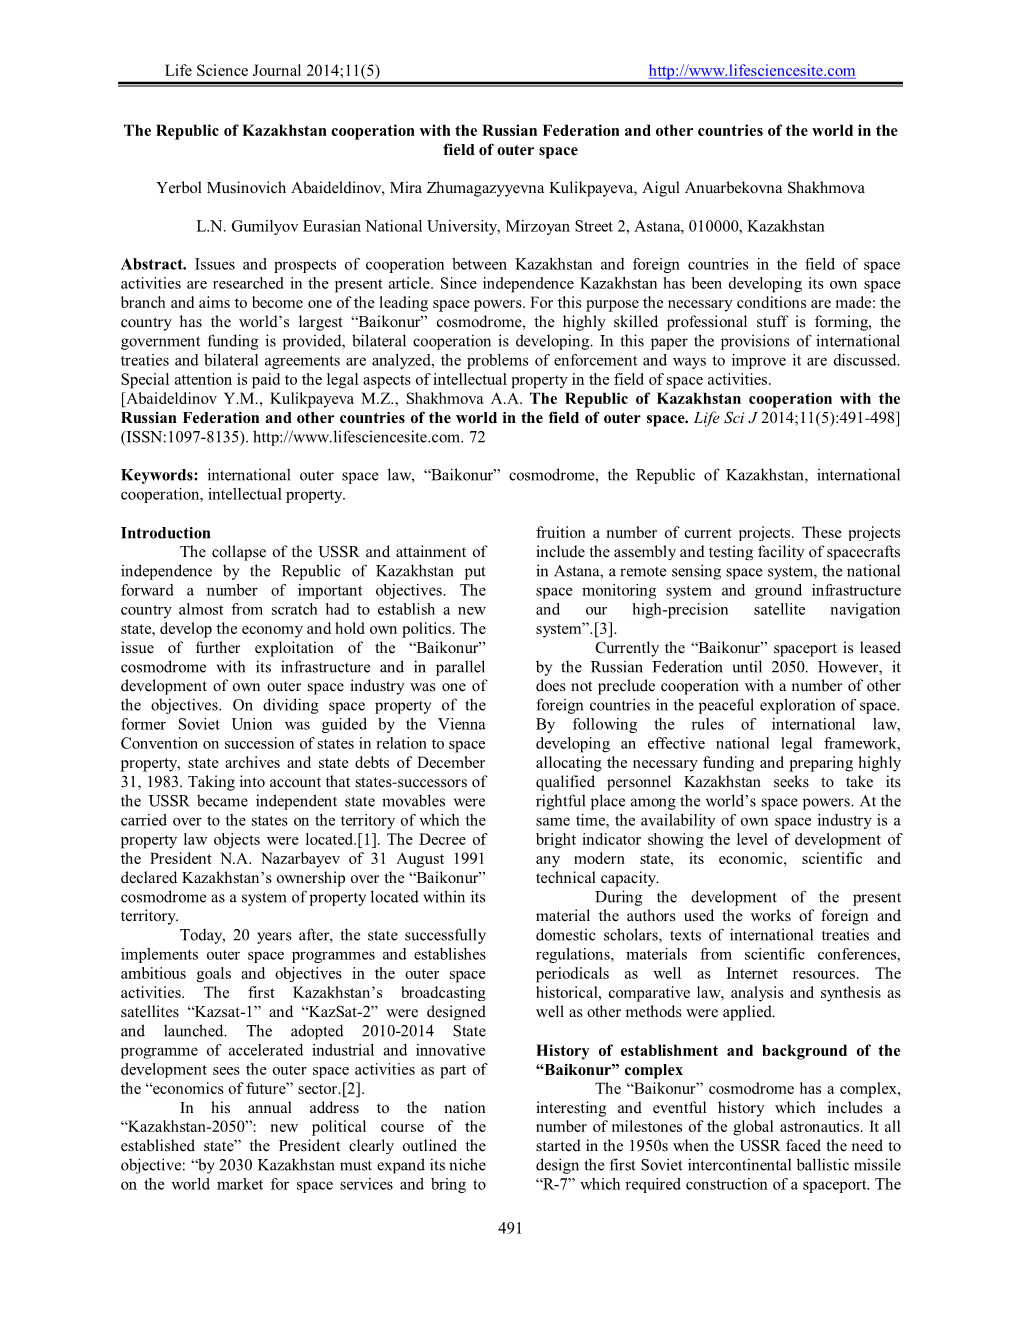 Life Science Journal 2014;11(5) 491 the Republic of Kazakhstan Cooperation with the Russian Feder